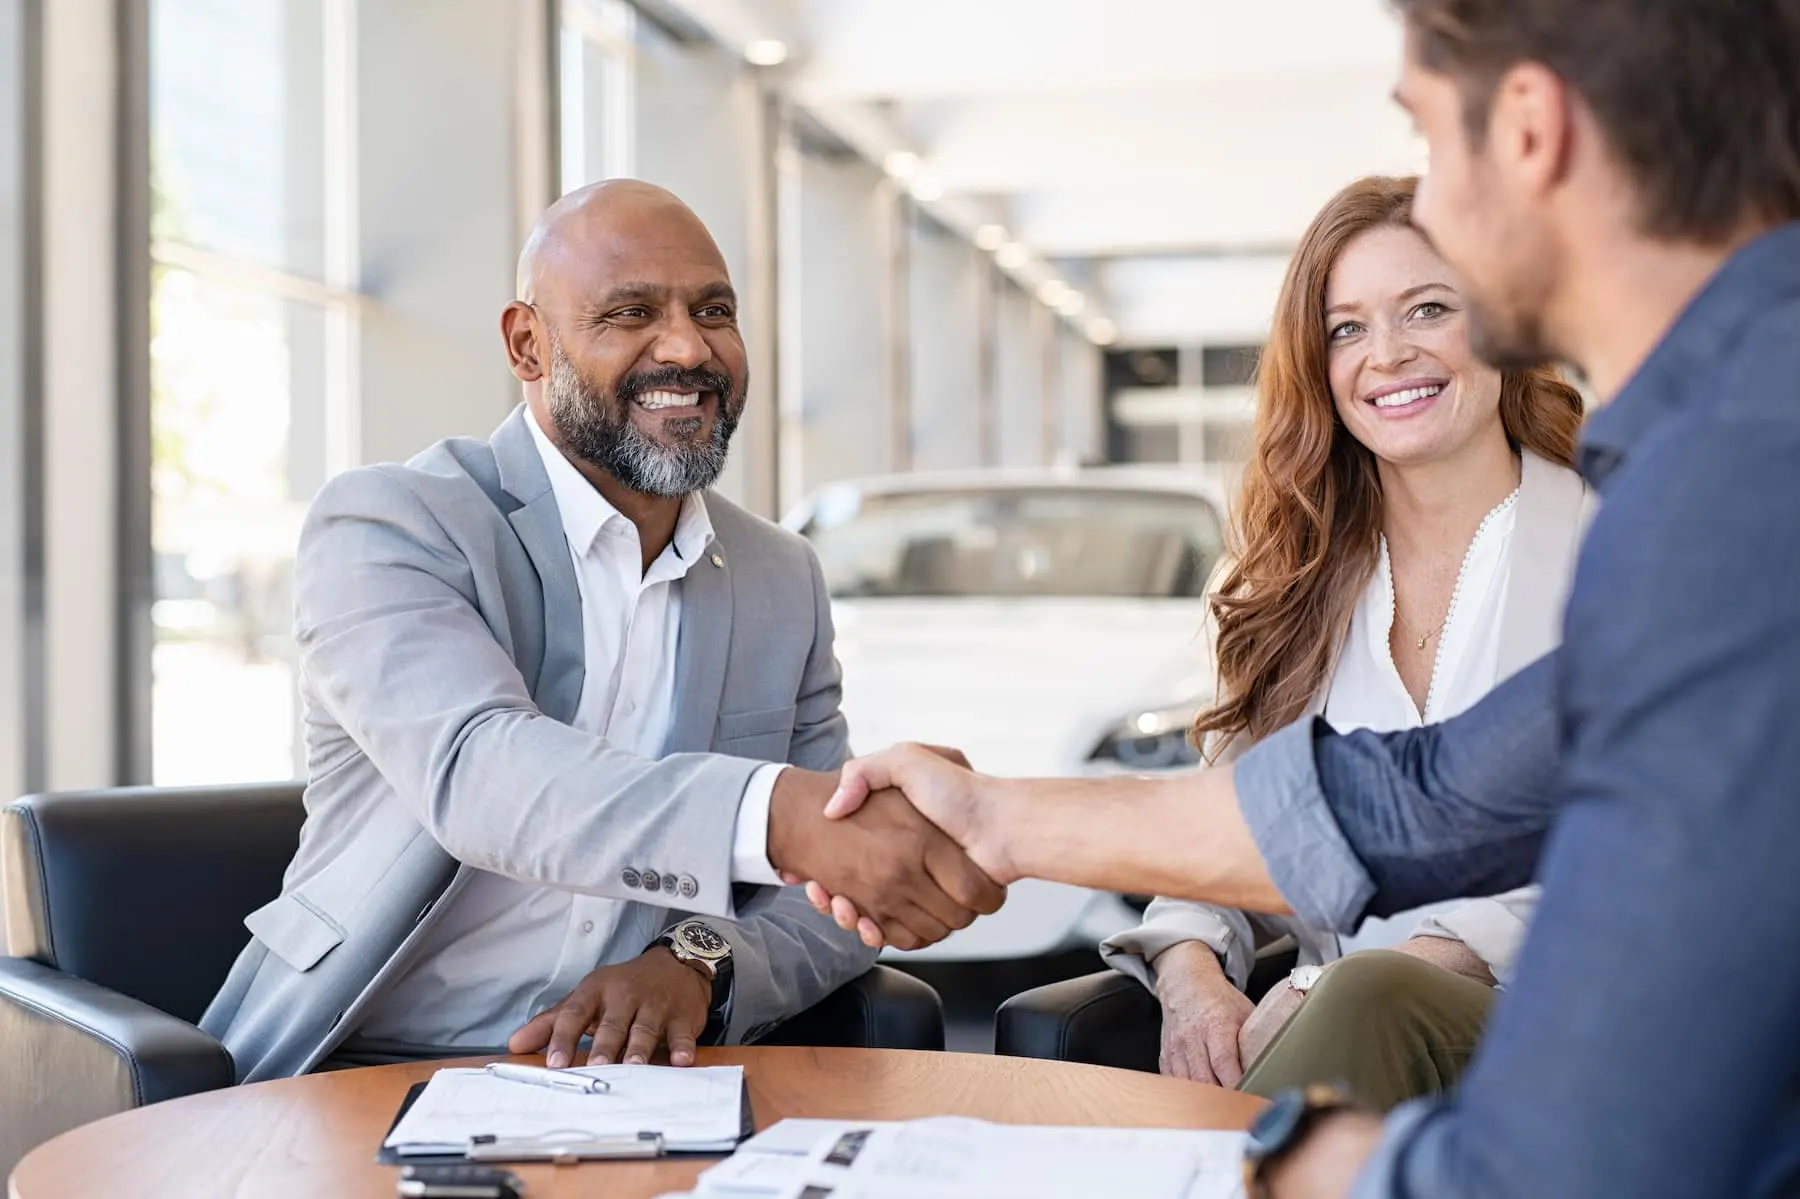 Business people shaking hands over papers at a dealership